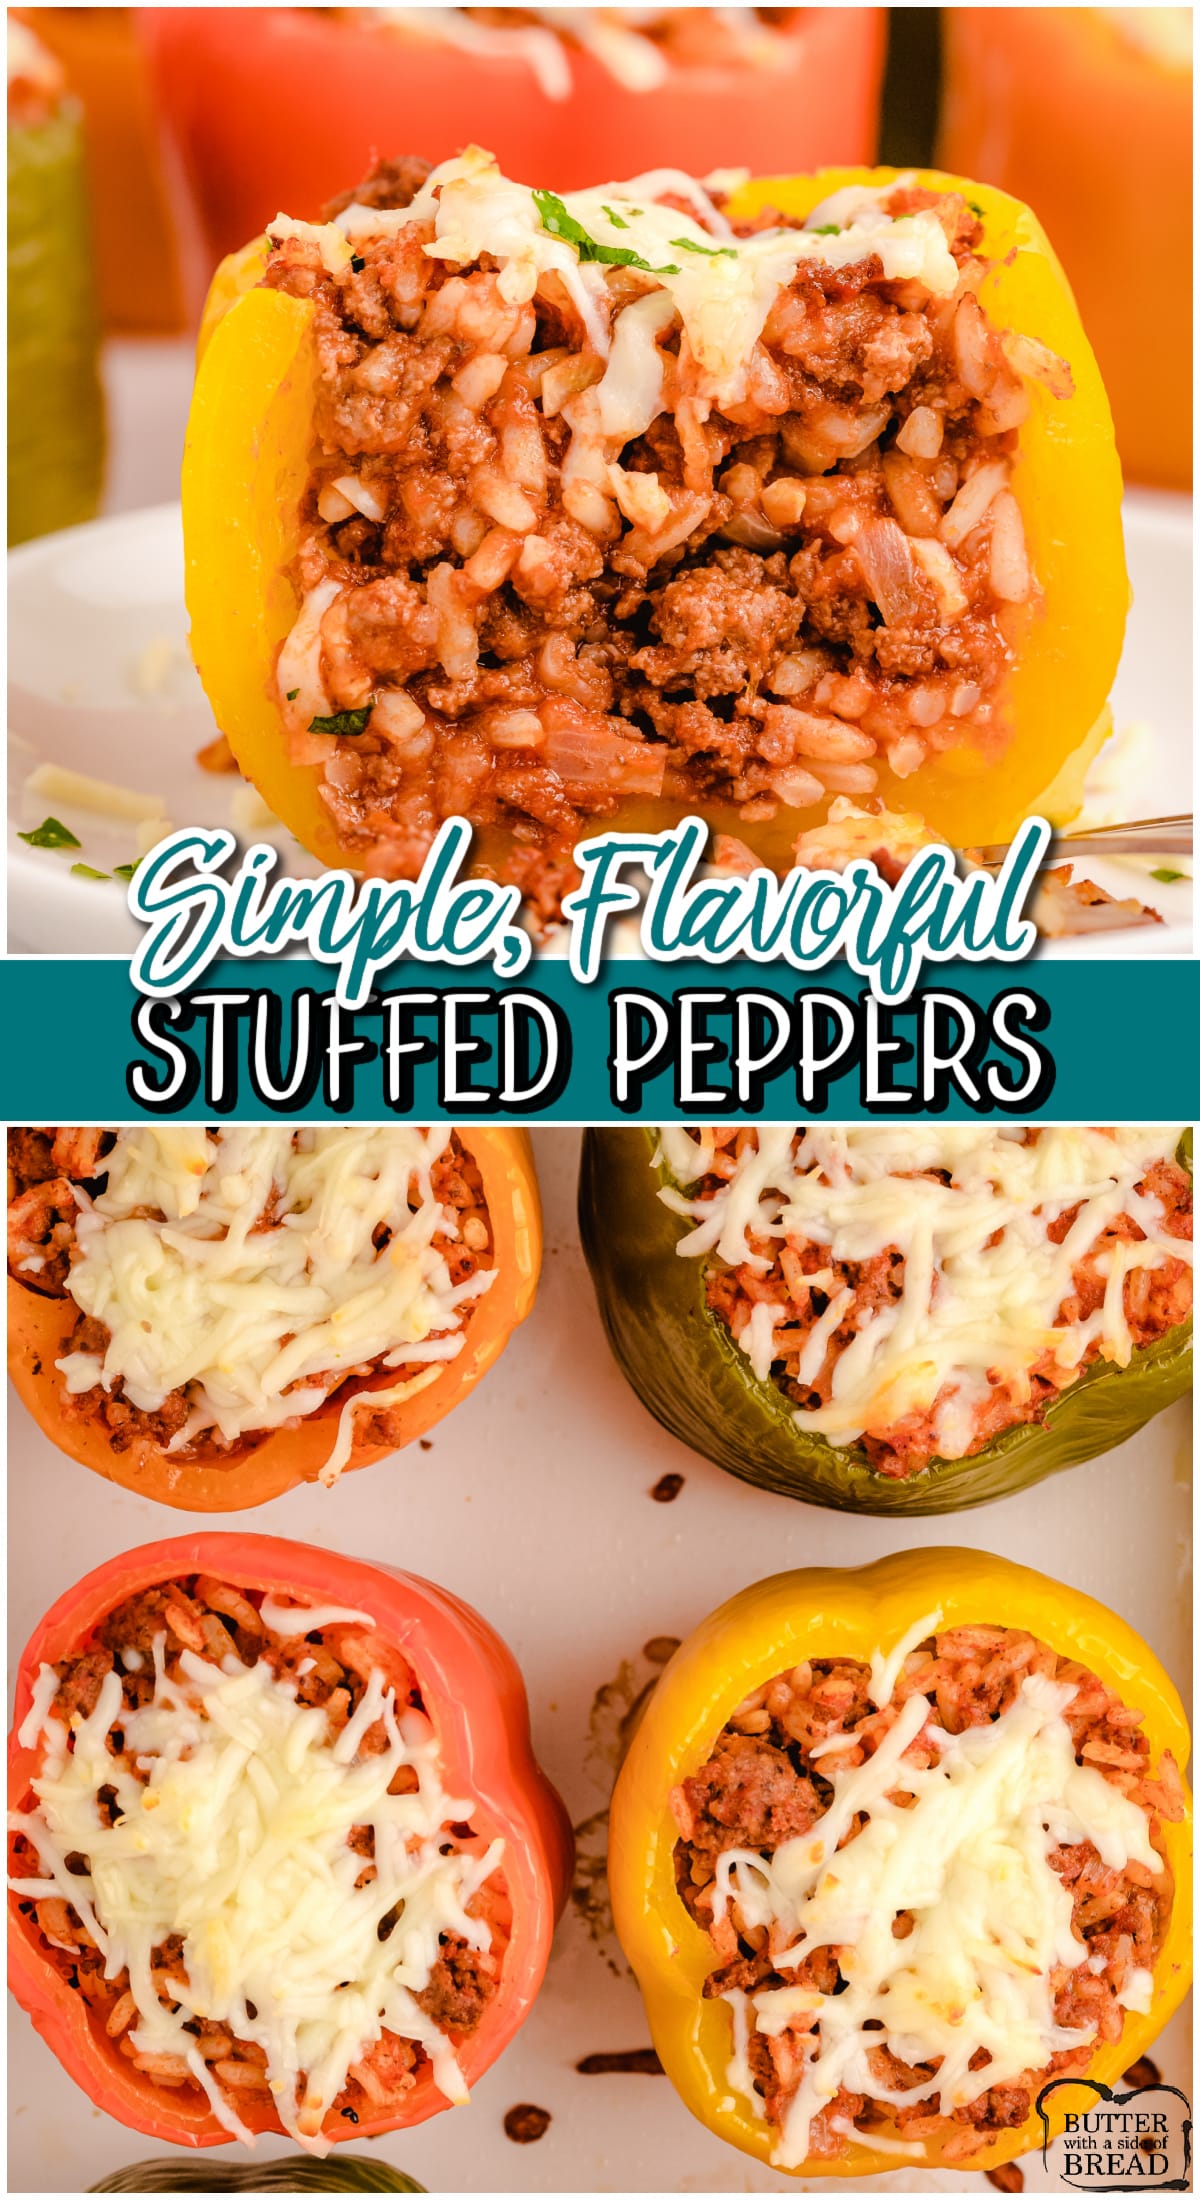 Stuffed bell peppers are a flavorful & comforting dish made with ground beef, rice, cheese and bell peppers. This easy stuffed peppers recipe is the perfect weeknight dinner!